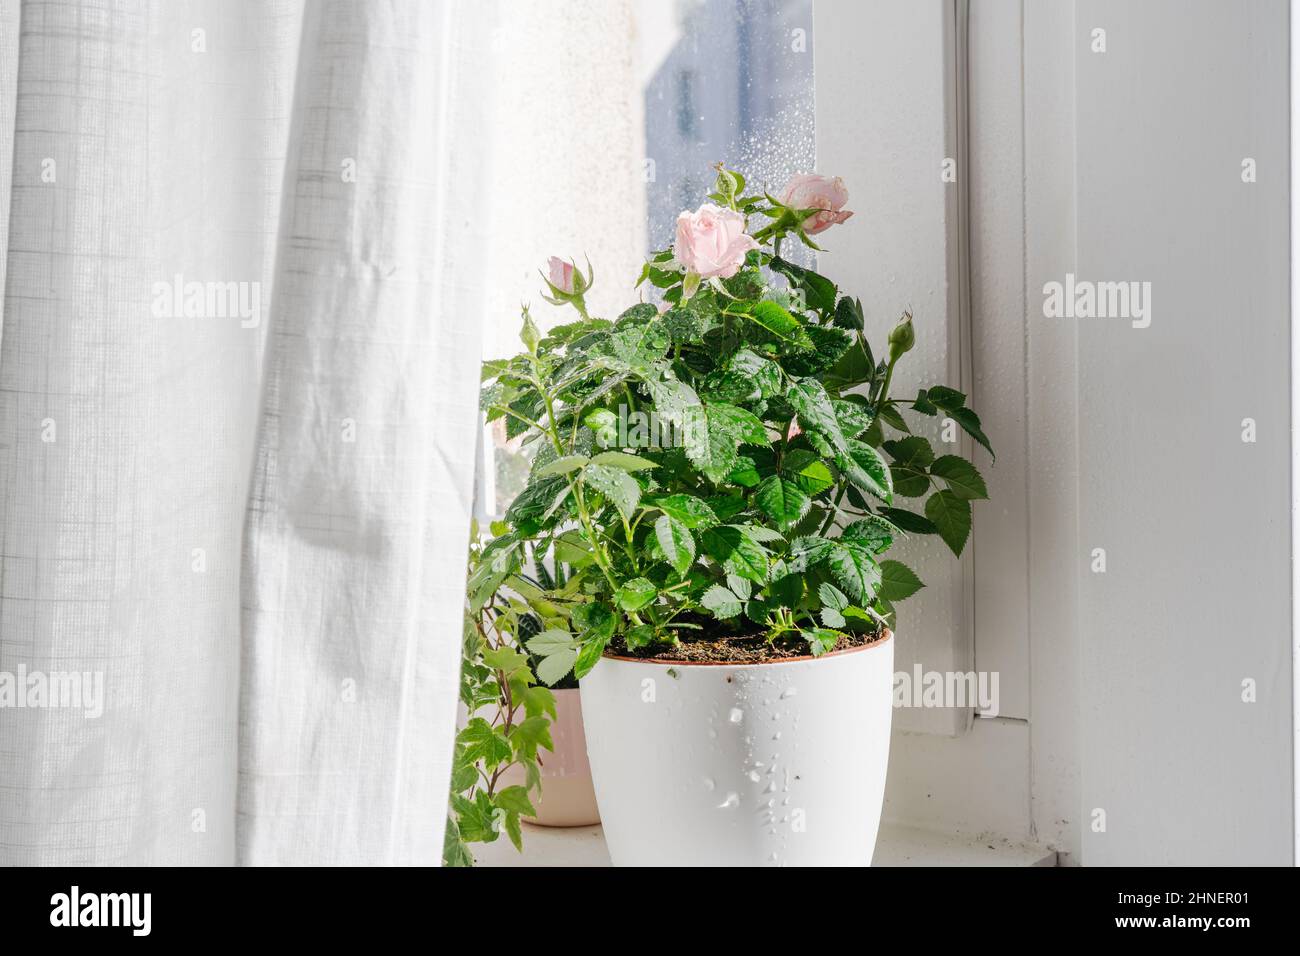 Indoor potted rose with water drops. Home hobby gardening on whiter time Stock Photo